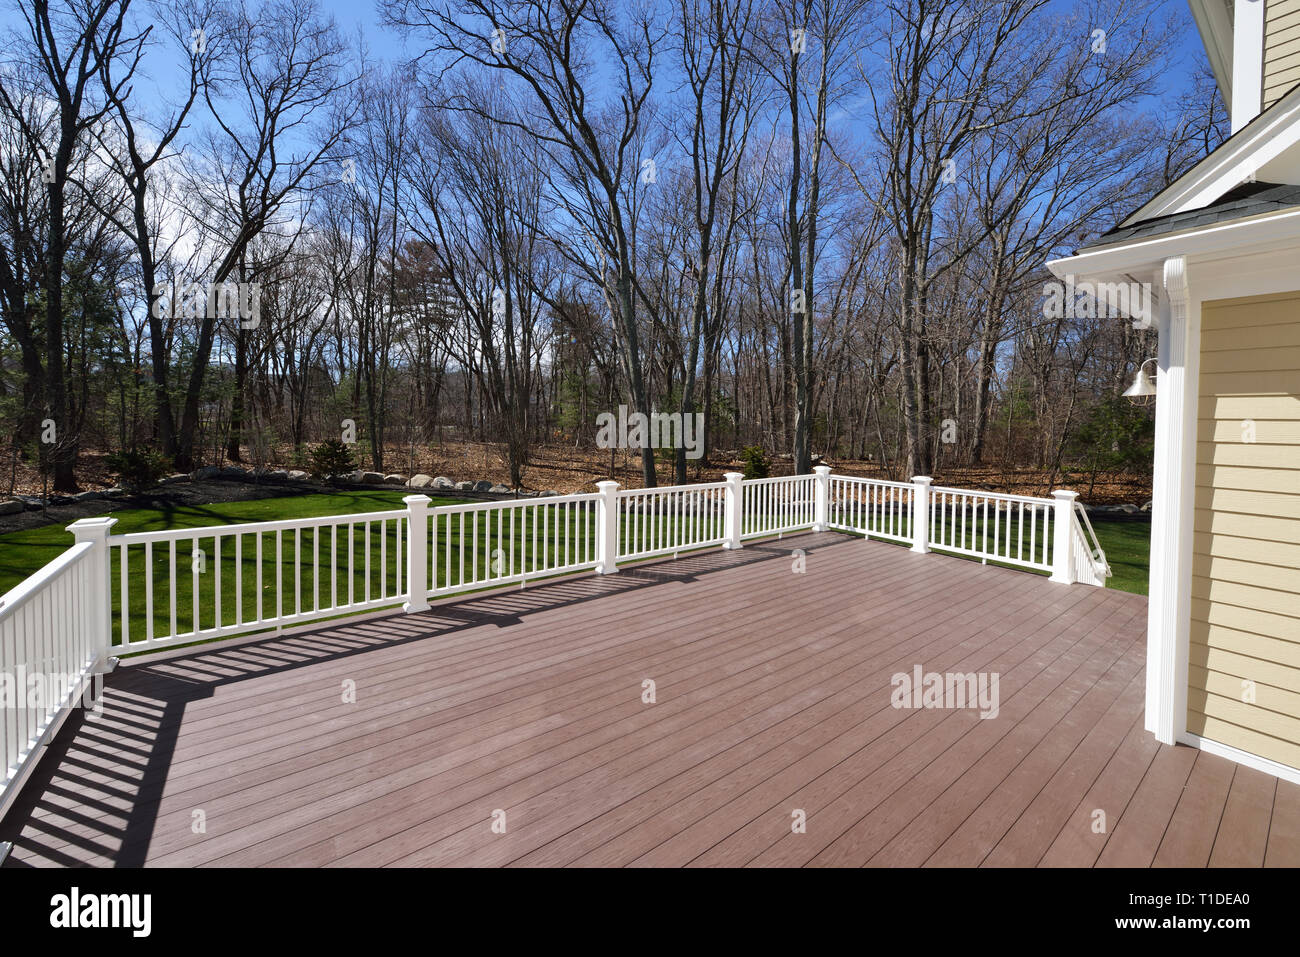 New backyard deck. White vinyl railings and composite brown boards. Large patio and garden space with a view to the woods. Stock Photo